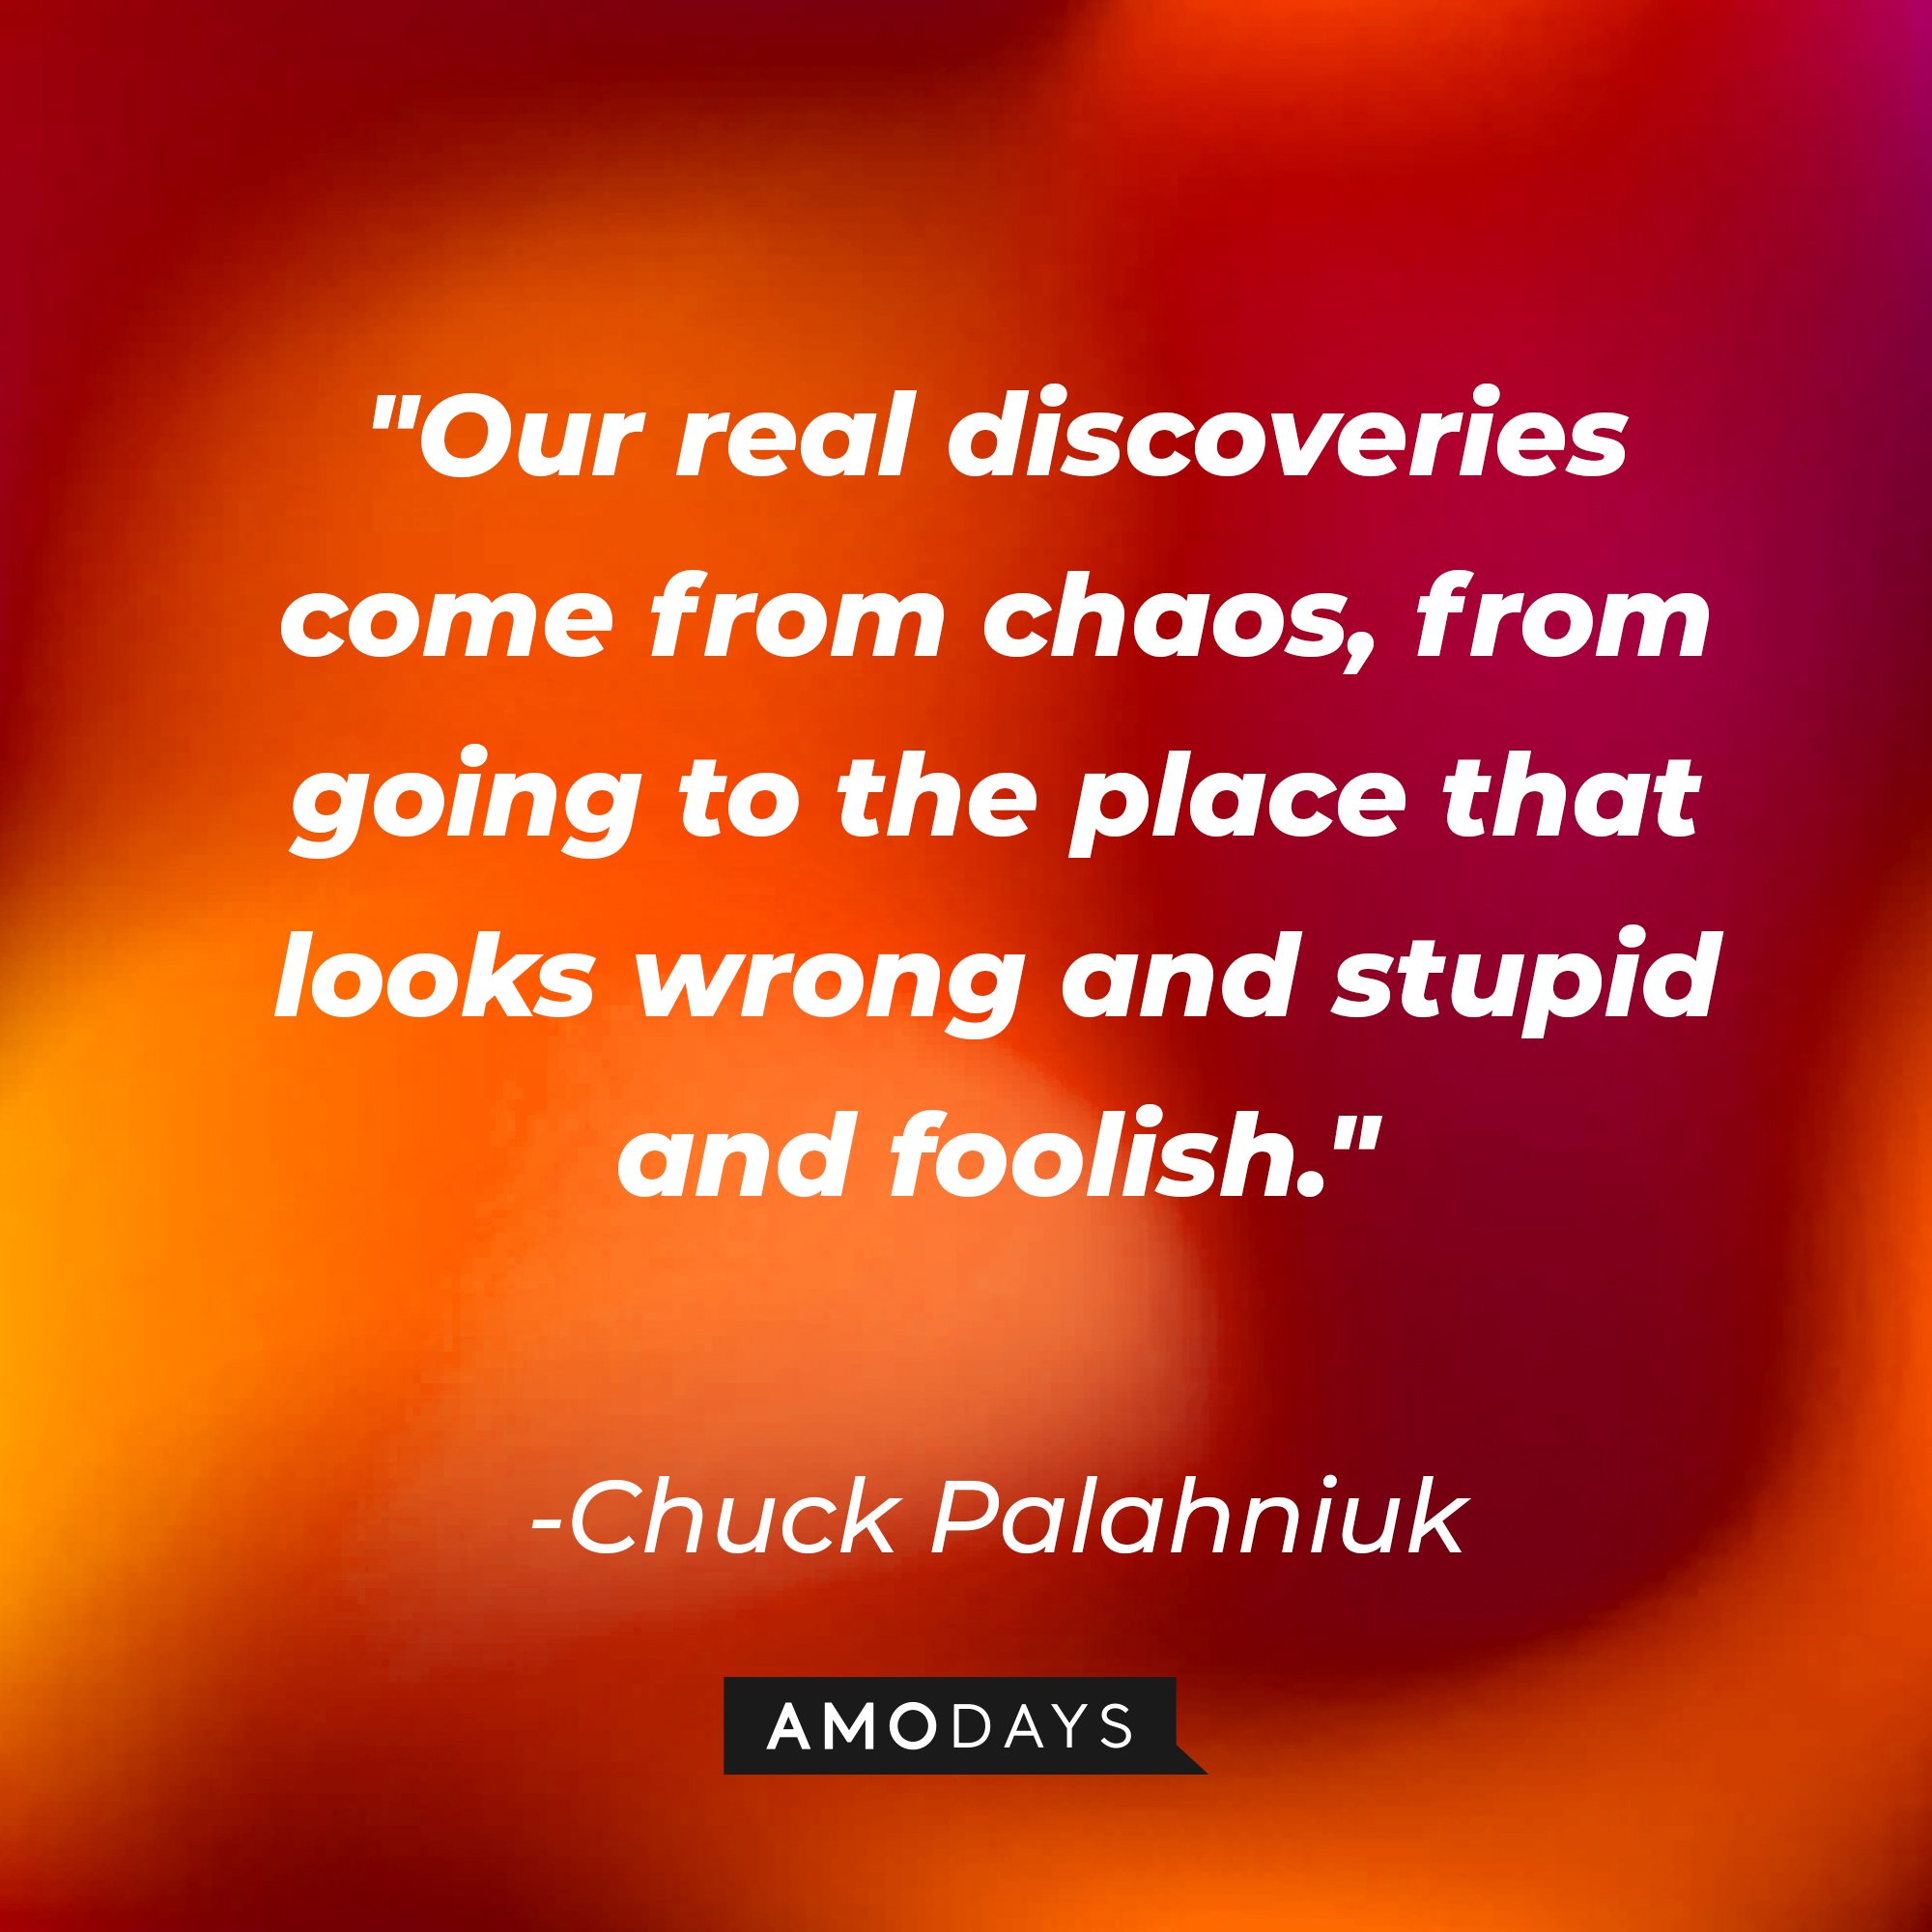 Chuck Palahniuk's quote: "Our real discoveries come from chaos, from going to the place that looks wrong and stupid and foolish." | Image: Amodays